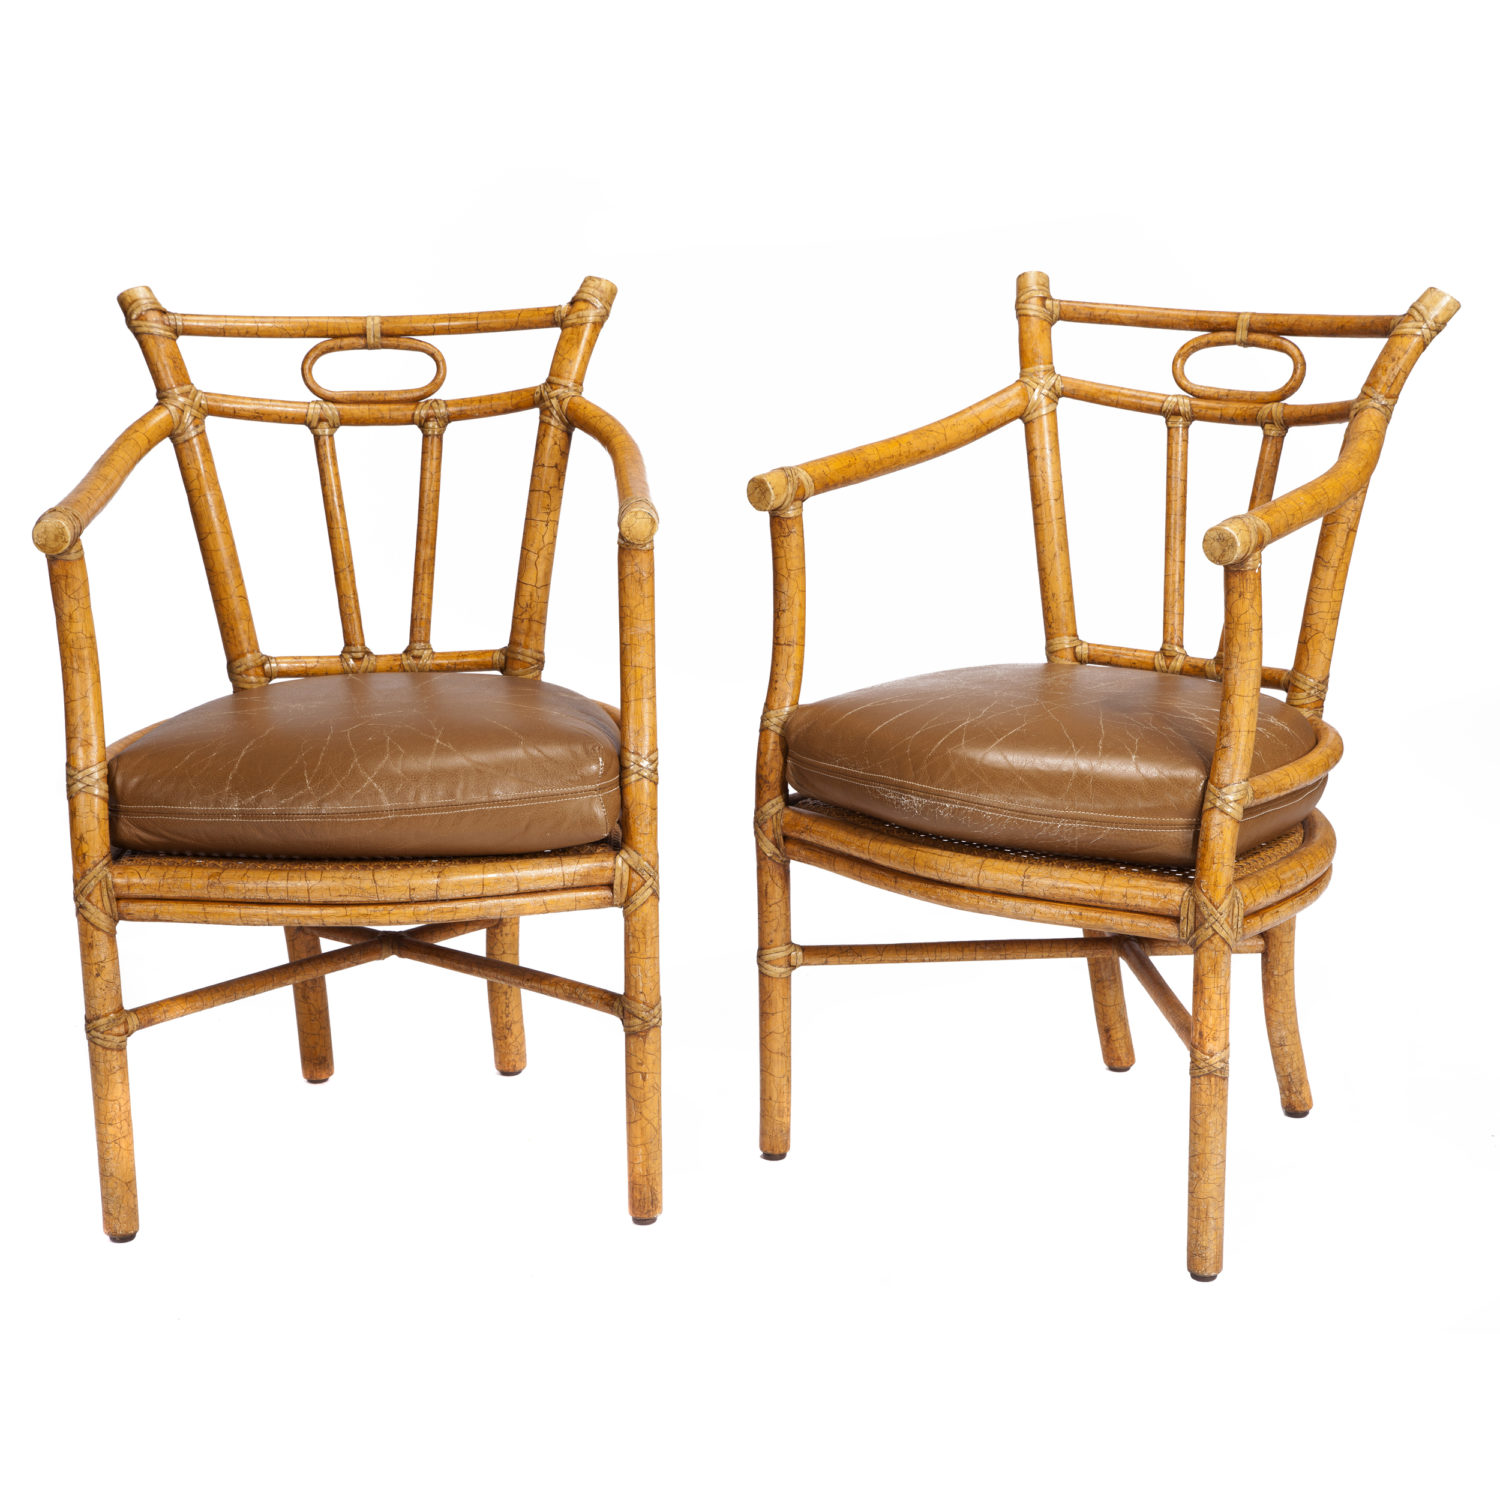 <p><a href="https://finesf.com/lot/pair-of-mcguire-chairs-4019121">Pair of McGuire Chairs Designed by Andrew Delfino (M-89)</a></p>